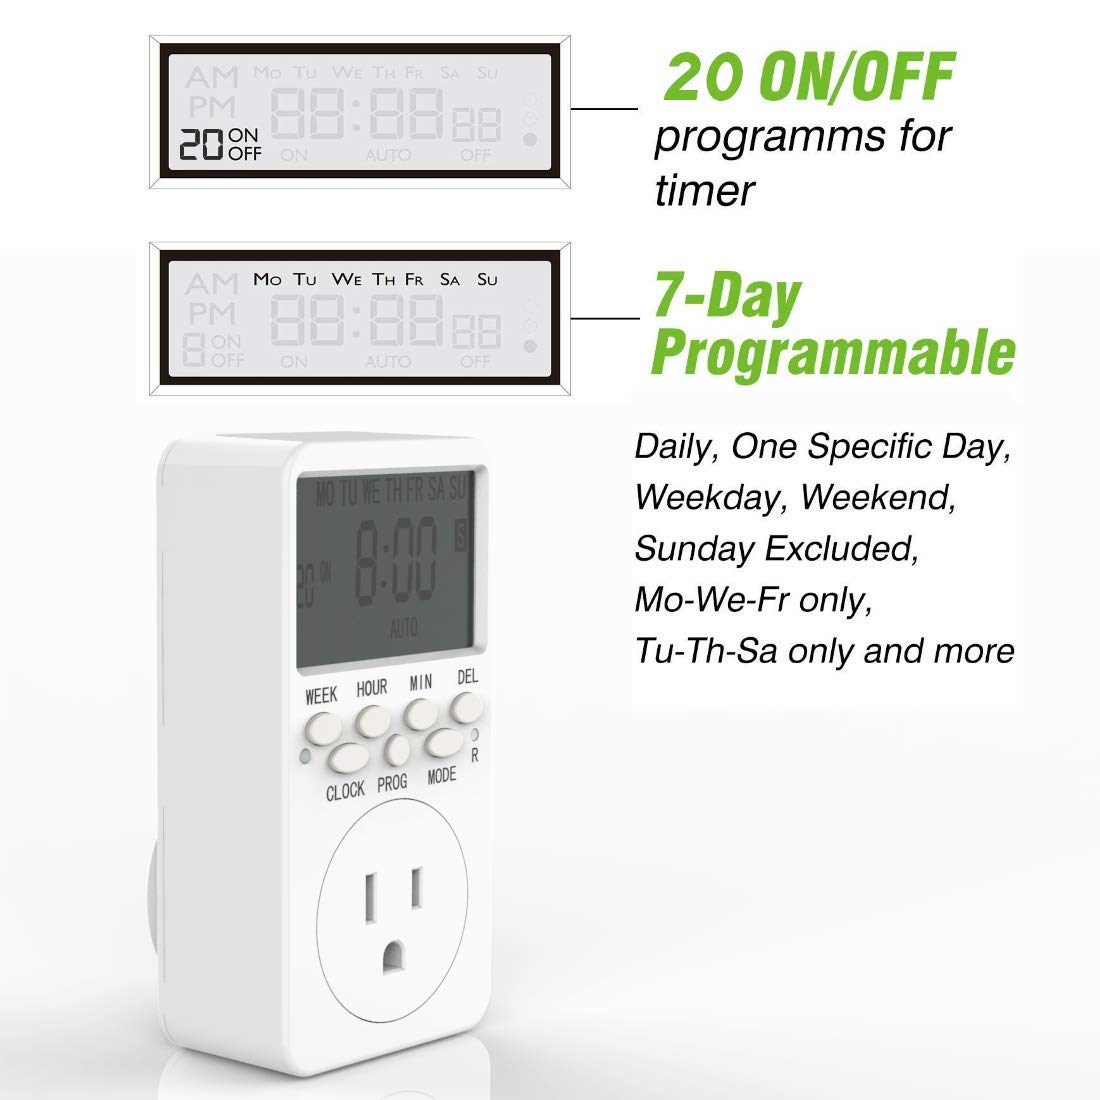 Generic Outlet Timer, Digital Countdown Plug-in Timer Outlet, 7 Day Weekly Programmable 110V AC Power Outlet Timer, Energy-Saving Indoo